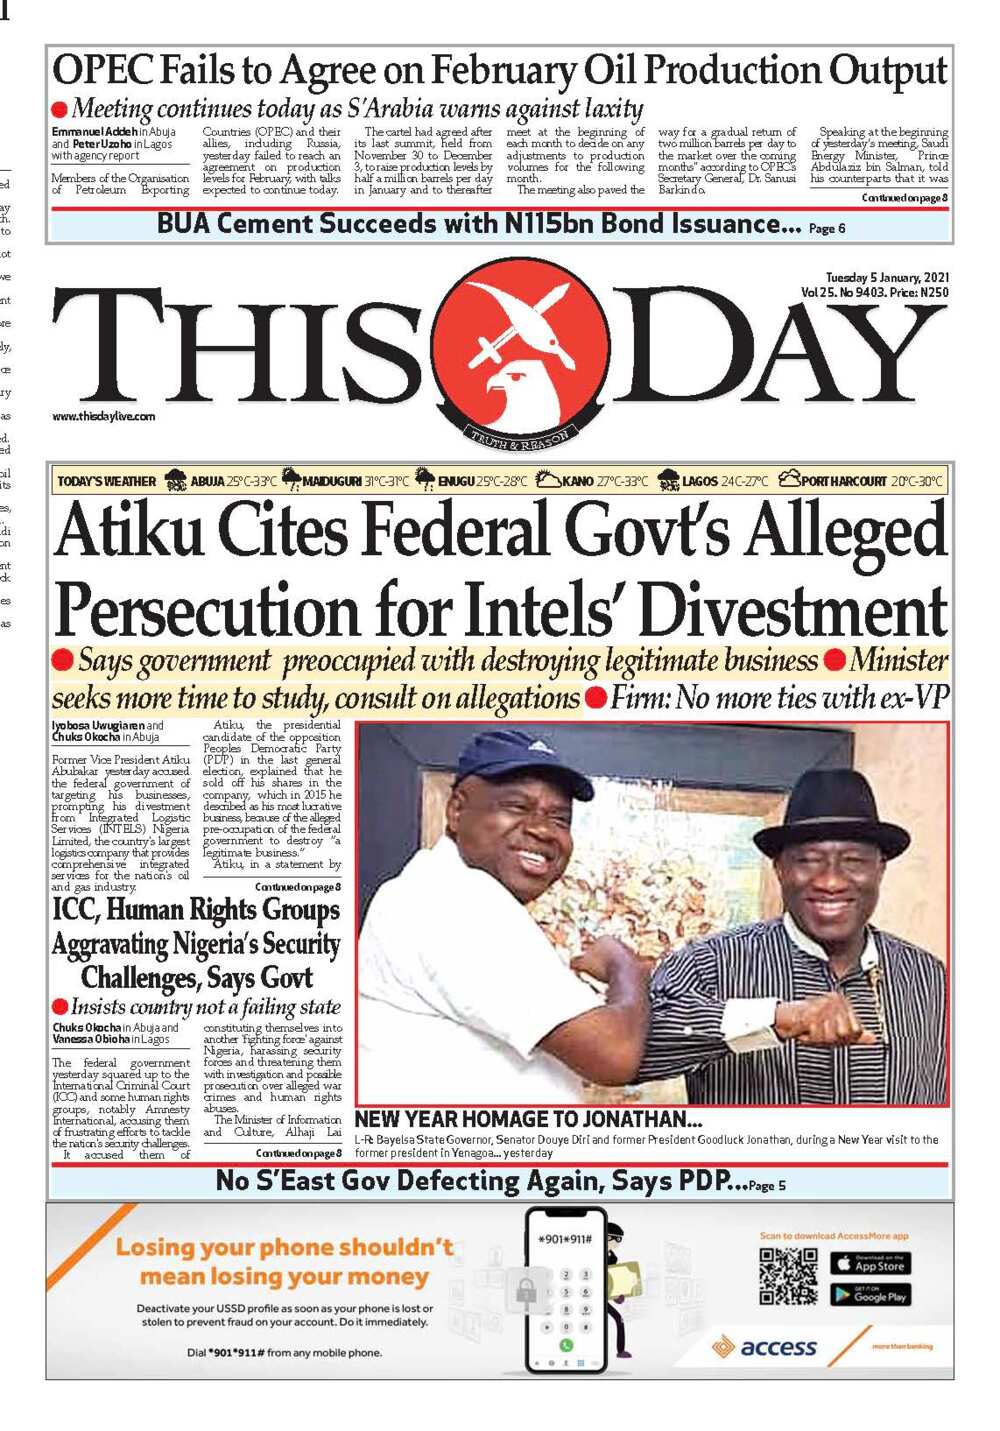 Newspaper reviews: FG accuses Amnesty, ICC, of fuelling insecurity in Nigeria